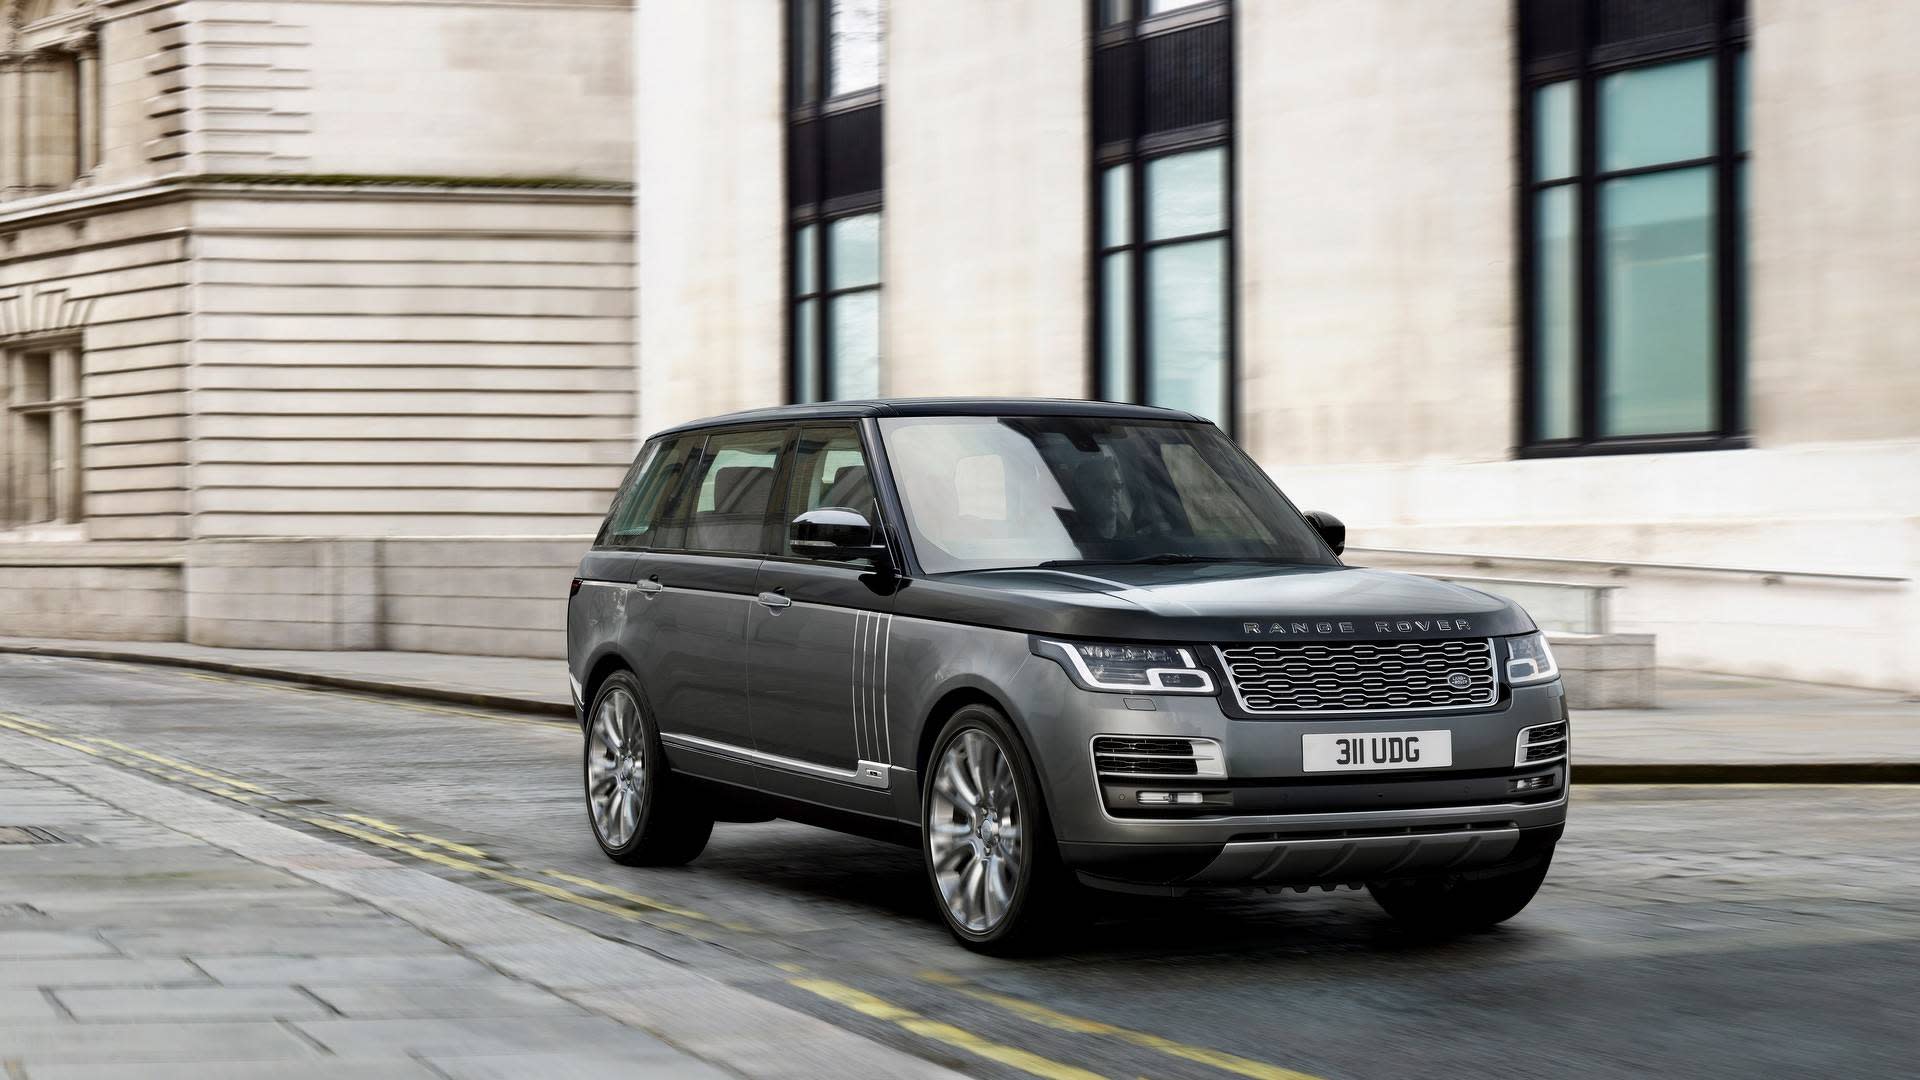 2021 Range Rover to be a lot lighter thanks to all-new ...